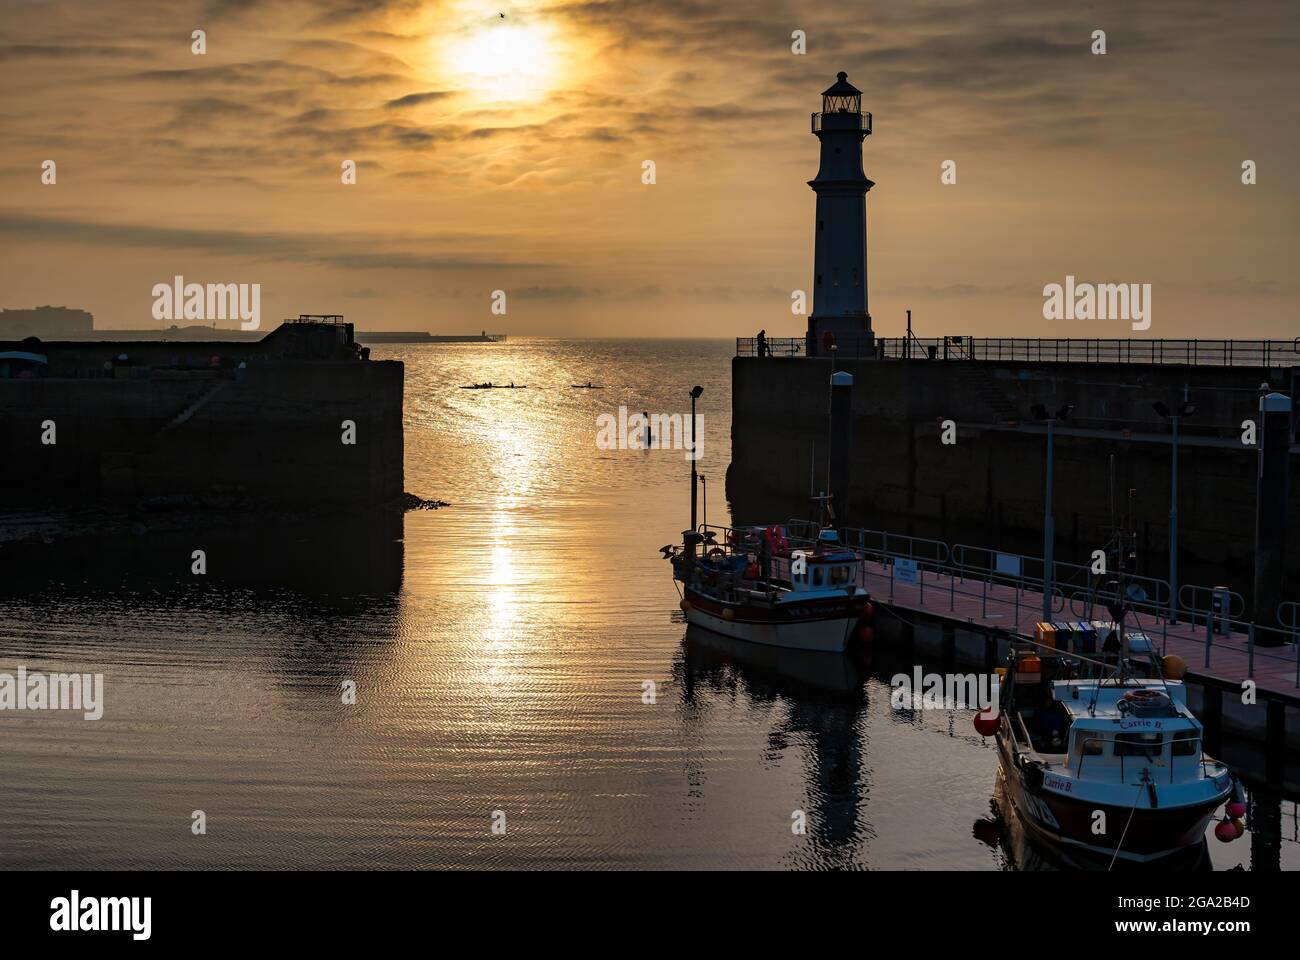 Boats in Newhaven harbour with lighthouse and kayakers at sunset, Firth of Forth, Edinburgh, Scotland, UK Stock Photo